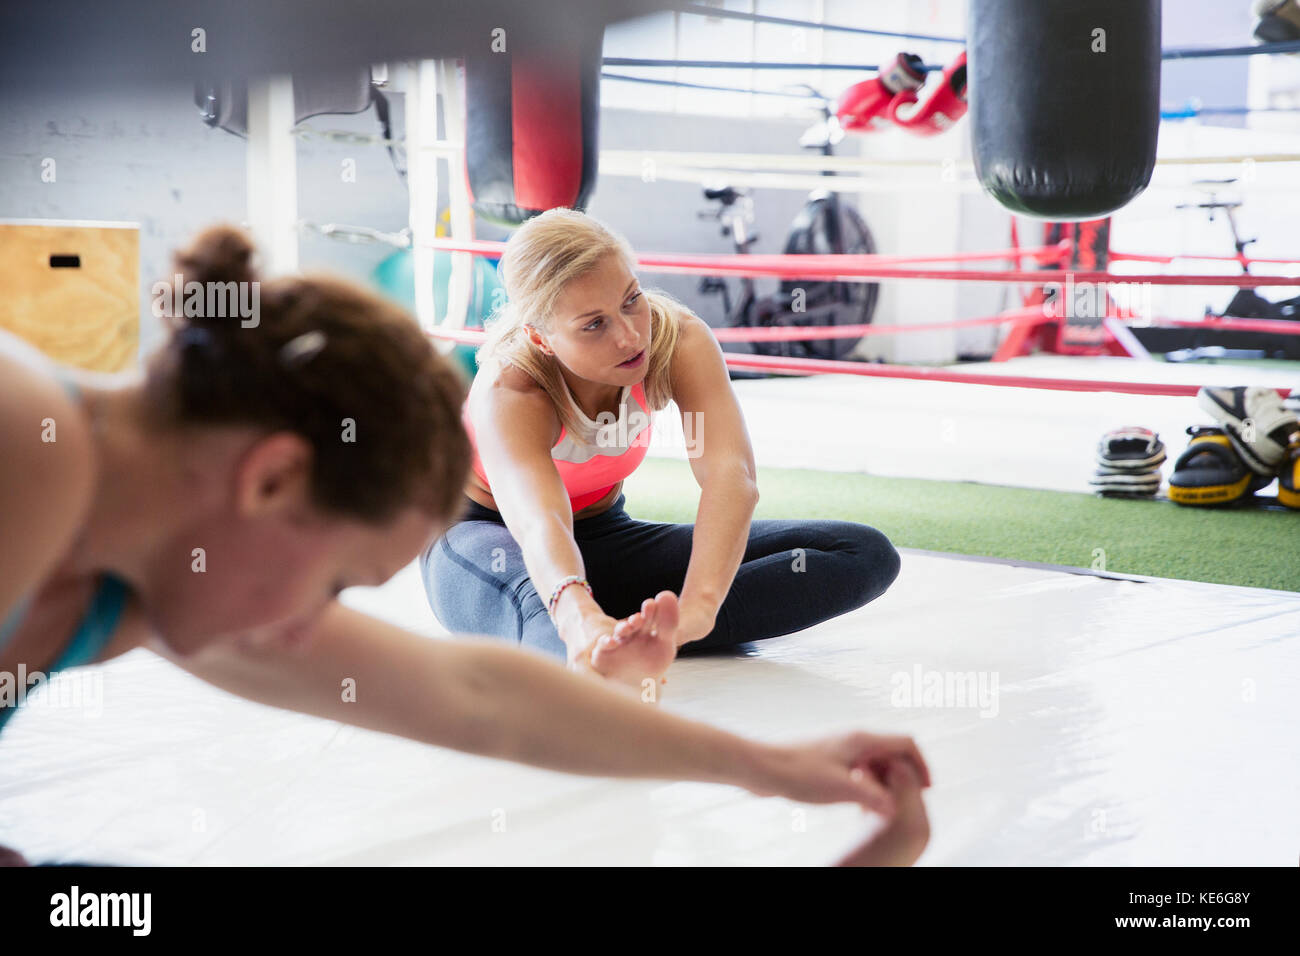 Young women stretching legs next to boxing ring in gym Stock Photo